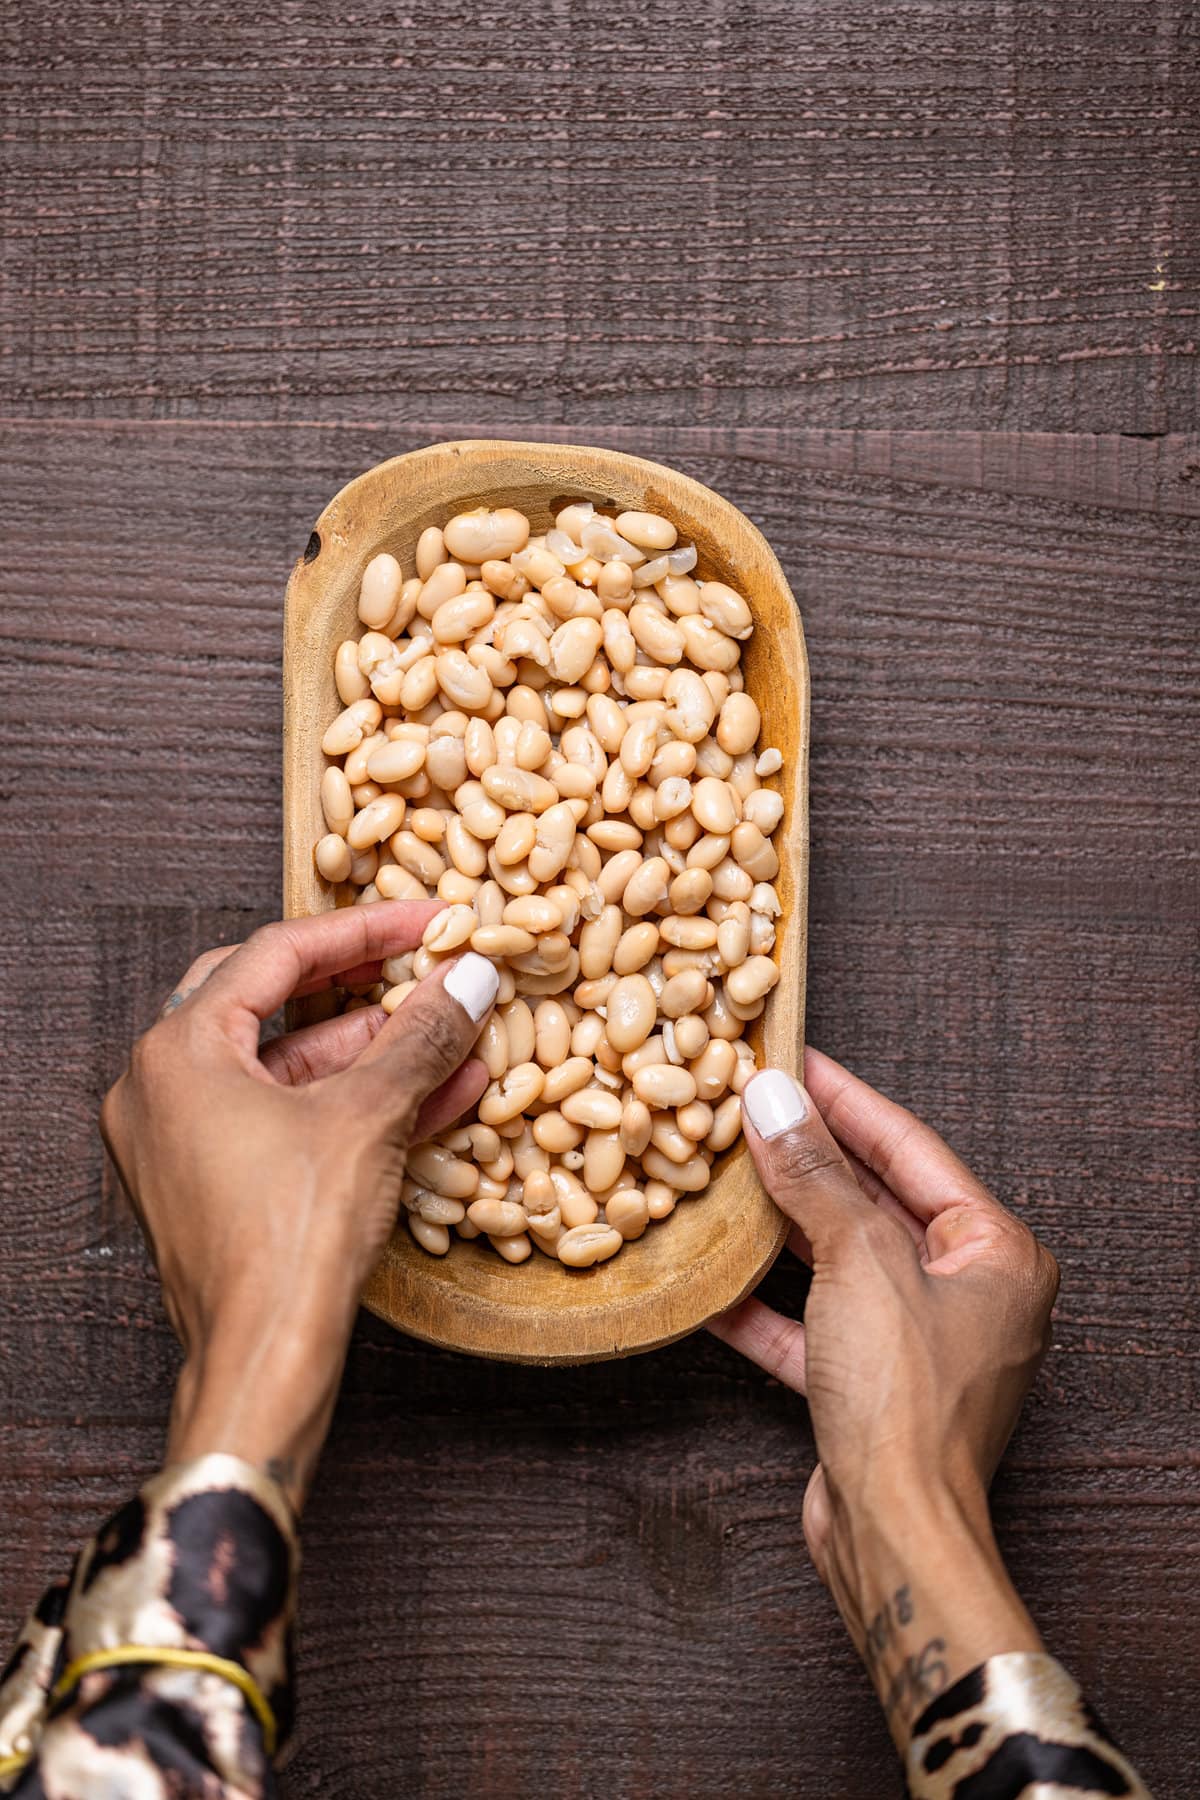 Hand grabbing some white beans out of a wooden bowl